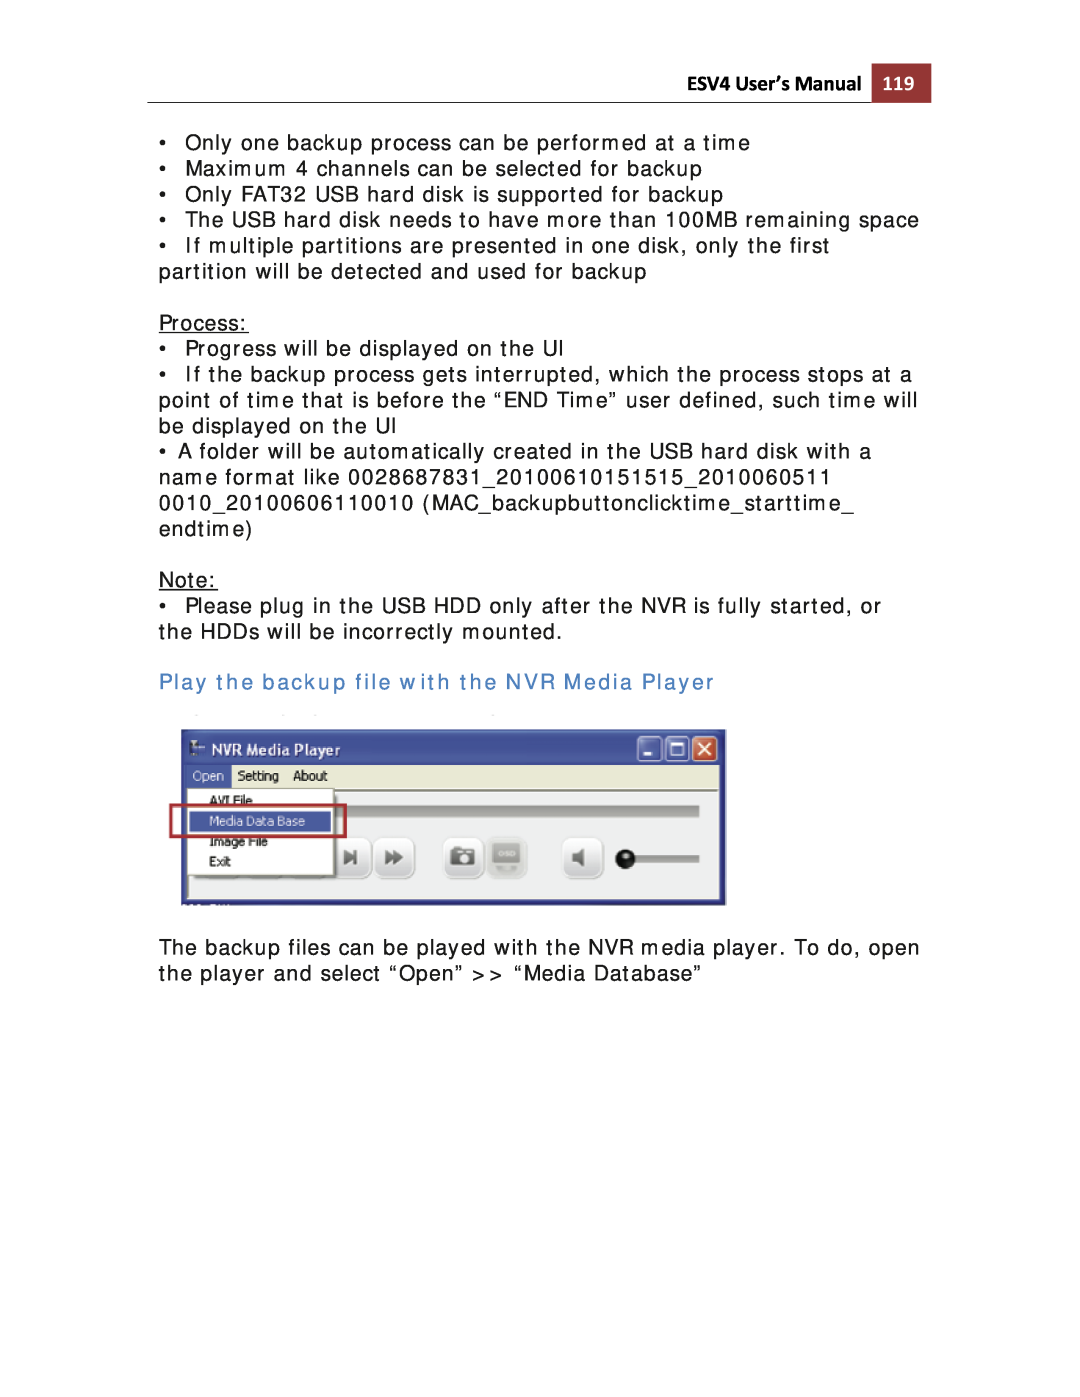 Toshiba ESV41T user manual Play the backup file with the NVR Media Player, ESV4 User’s Manual 